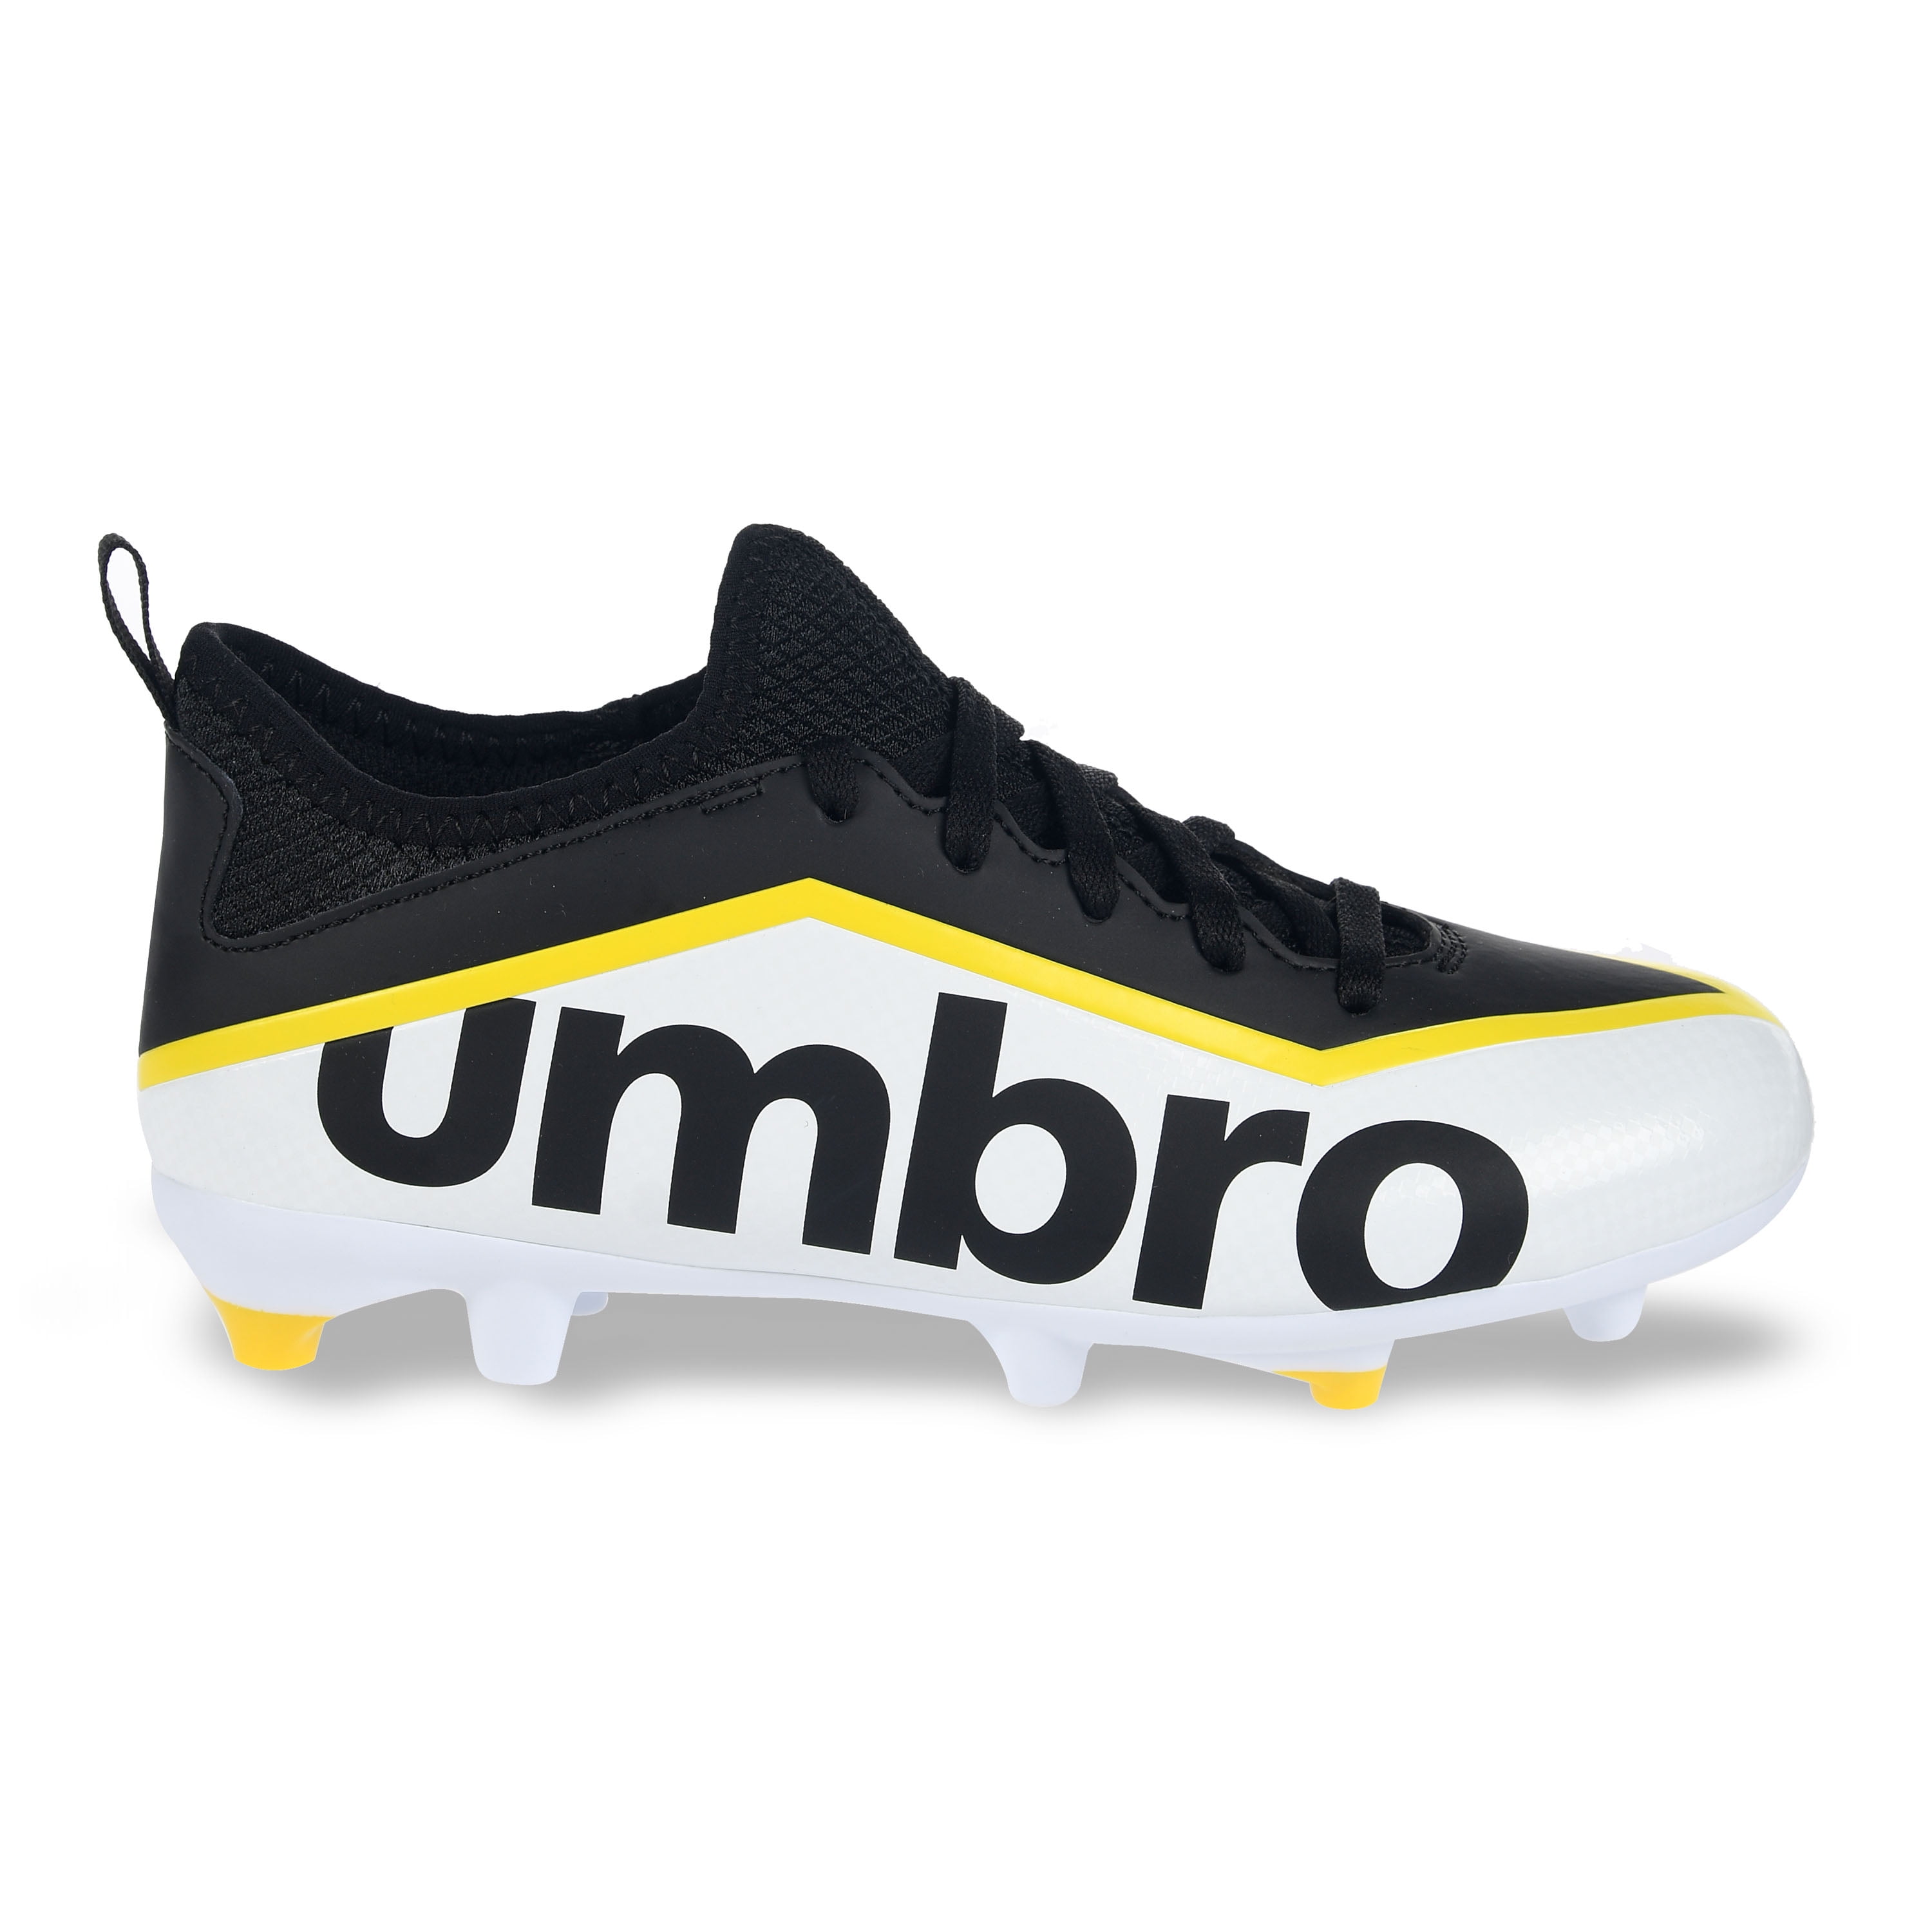 Details about   Umbro Pivot Kids Soccer Cleats Black/White/Yellow Textured sole Lace up New 